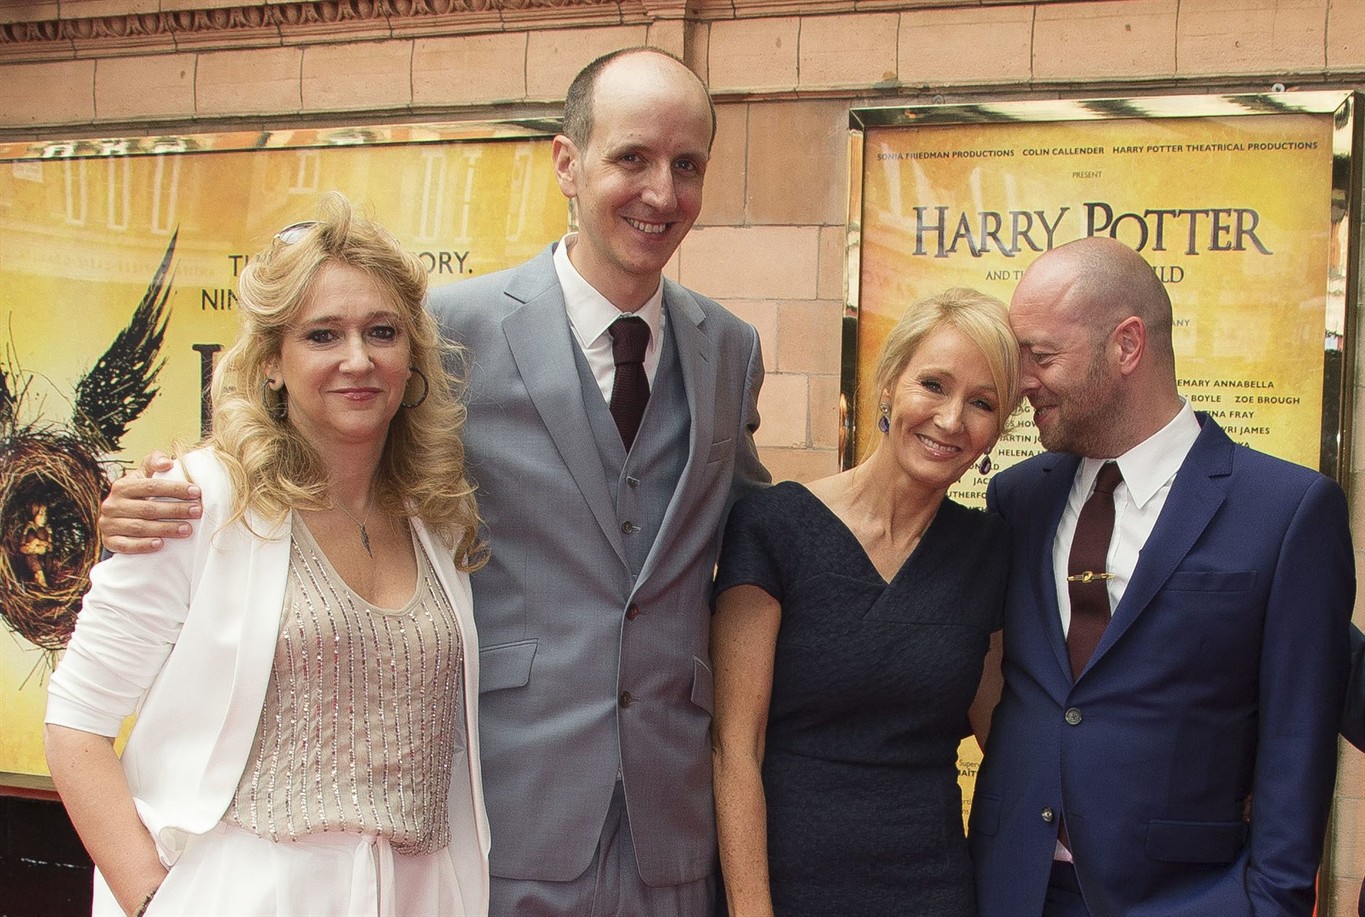 Image result for images sonia friedman Harry potter and the cursed child